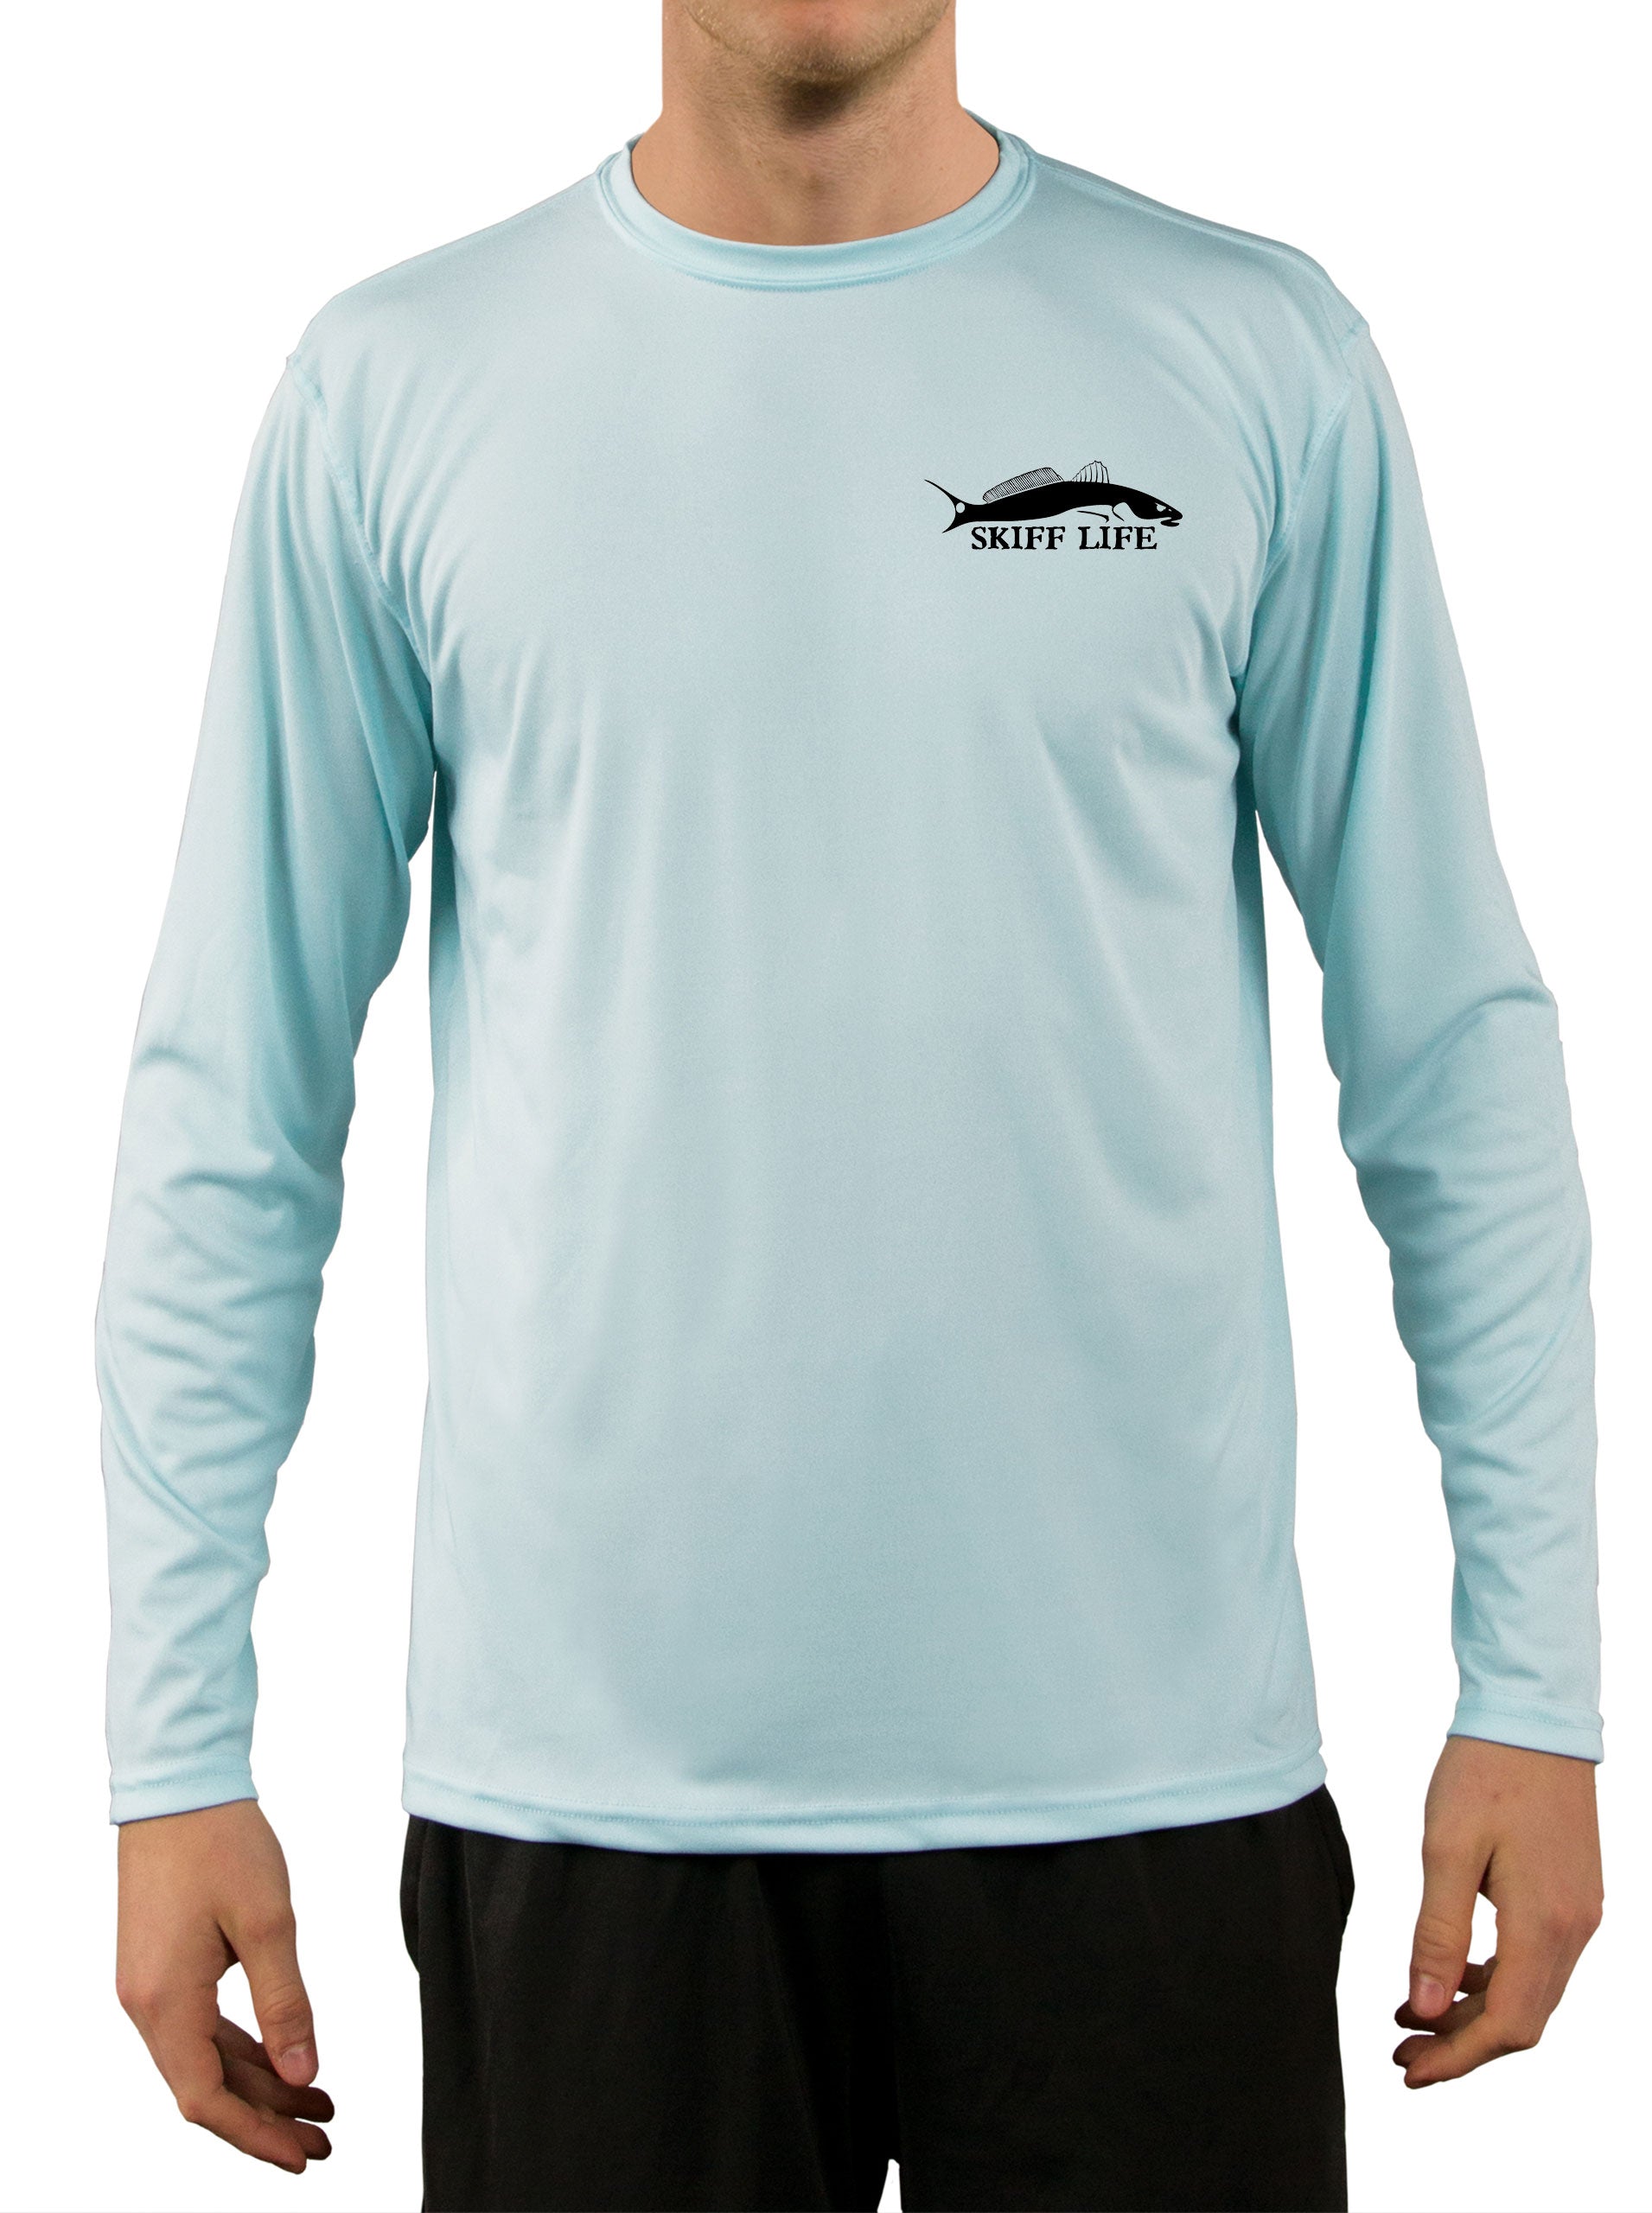 Big and Tall Mens Clothing - UV Protected Fishing T Shirt +50 Sun Protection with Moisture Wicking Technology - Up to 4XL 3XL / Ice Blue